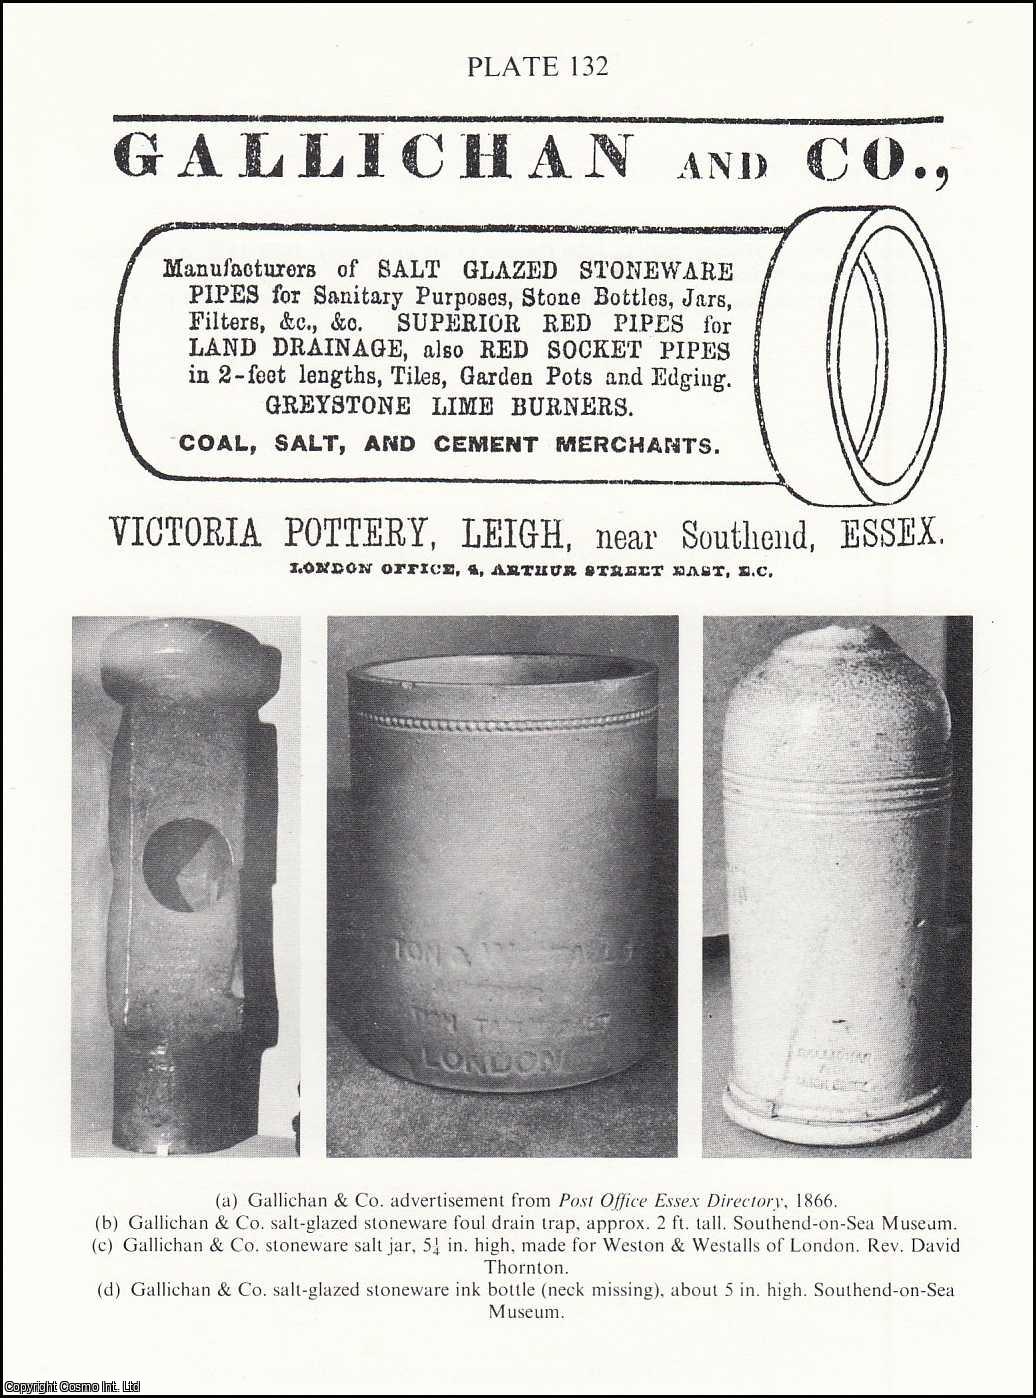 John Howell - The Stoneware Pottery at Leigh-on-Sea, Essex. An original article from the English Ceramic Circle, 1986.